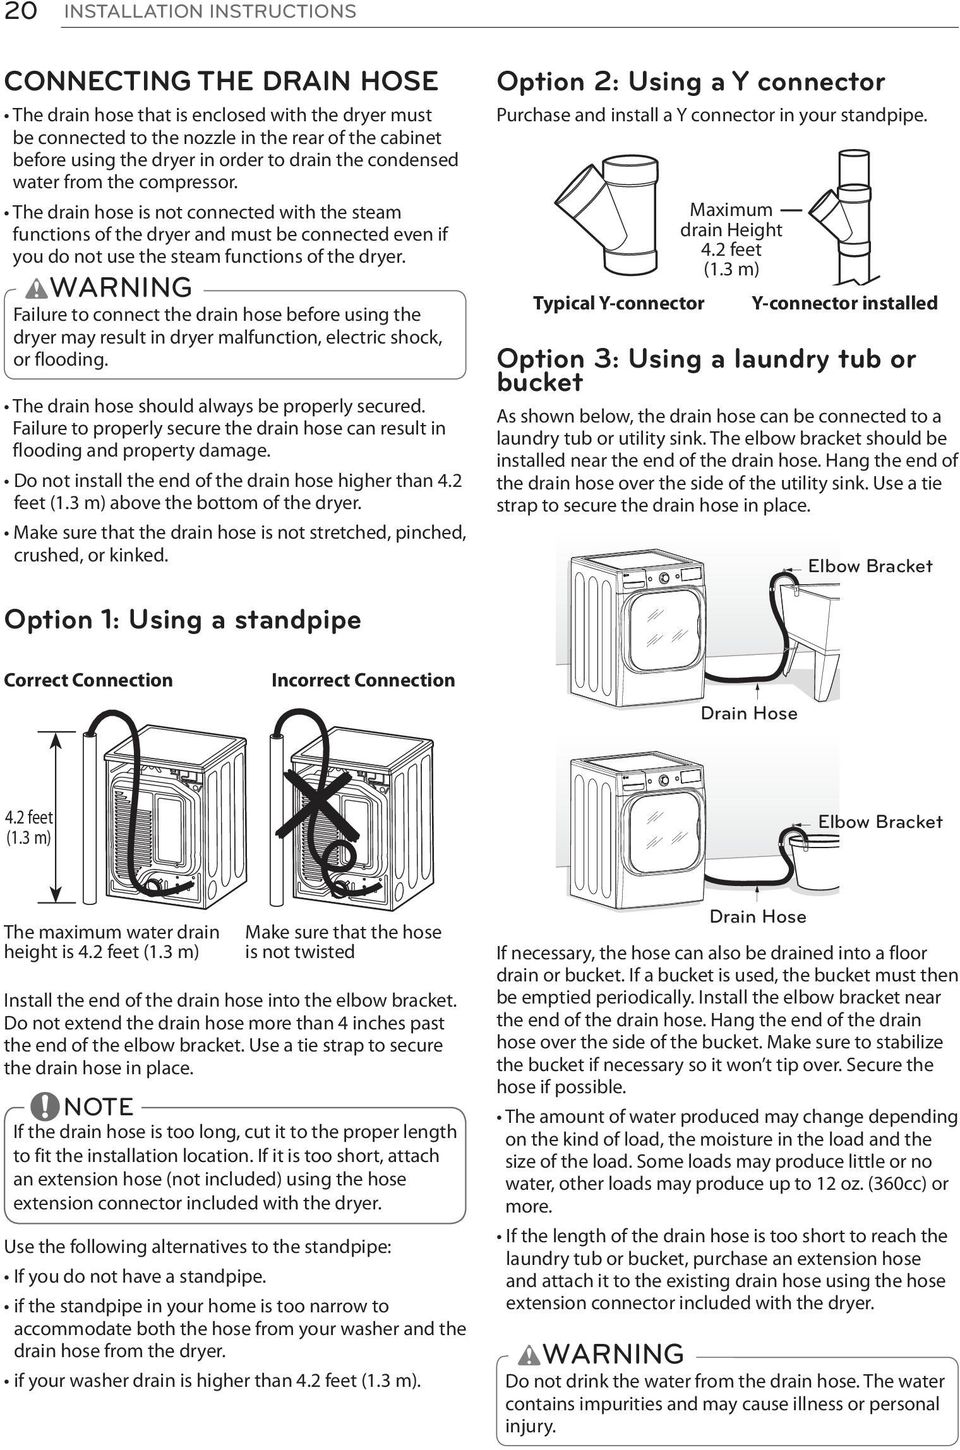 WARNING Failure to connect the drain hose before using the dryer may result in dryer malfunction, electric shock, or flooding.